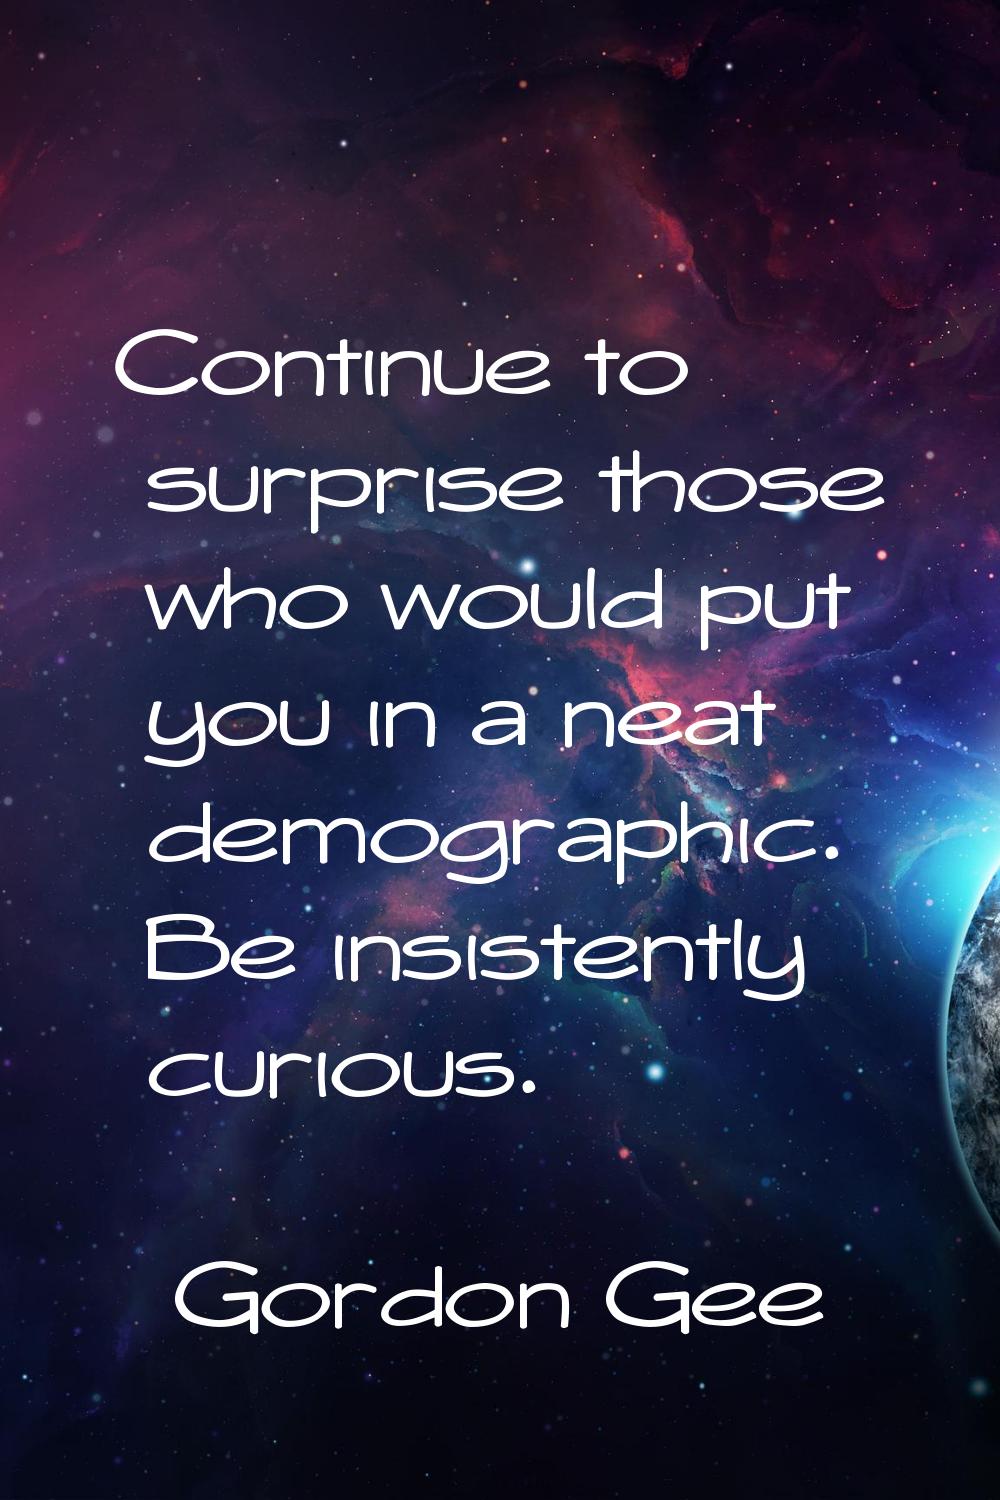 Continue to surprise those who would put you in a neat demographic. Be insistently curious.